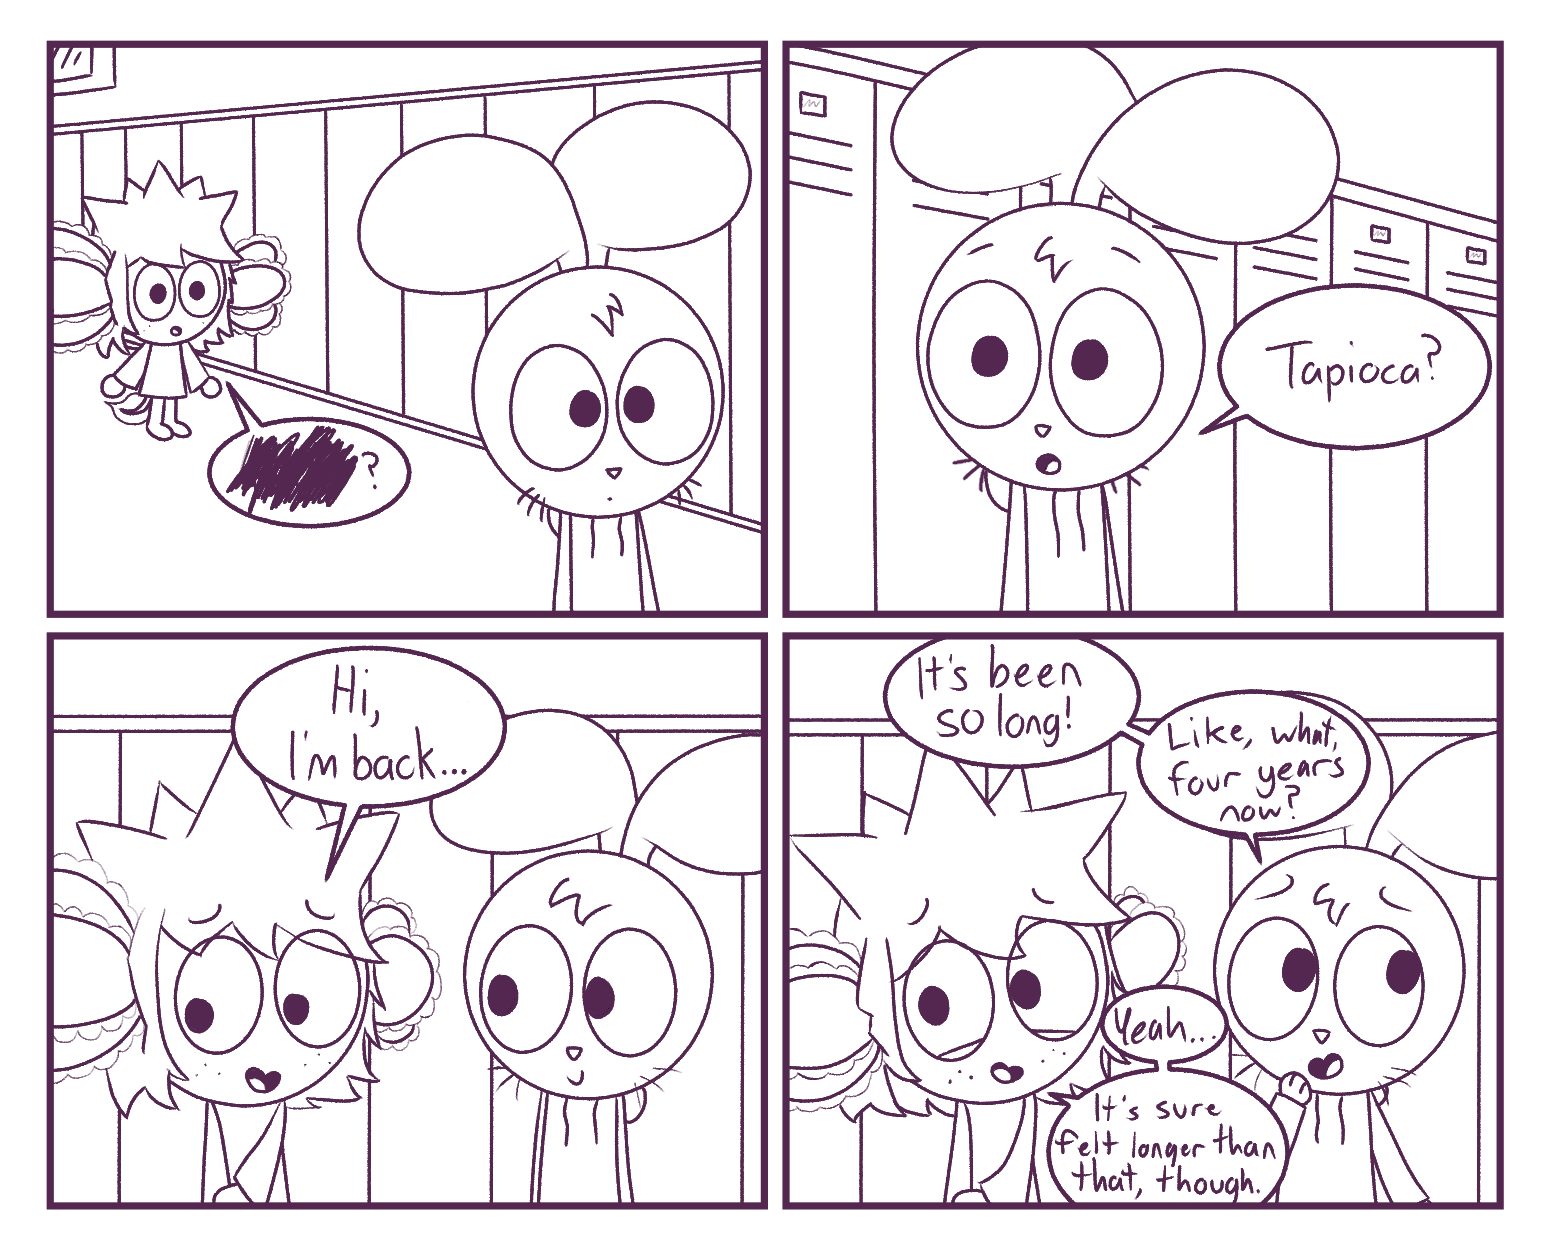 Panel 1: Tapioca: ======== | Panel 2: Hazel: Tapioca? | Panel 3: Tapioca: Hi, I'm back... | Panel 4: Hazel: It's been so long! Like, what, four years now? / Tapioca: Yeah... It's sure felt longer than that, though.